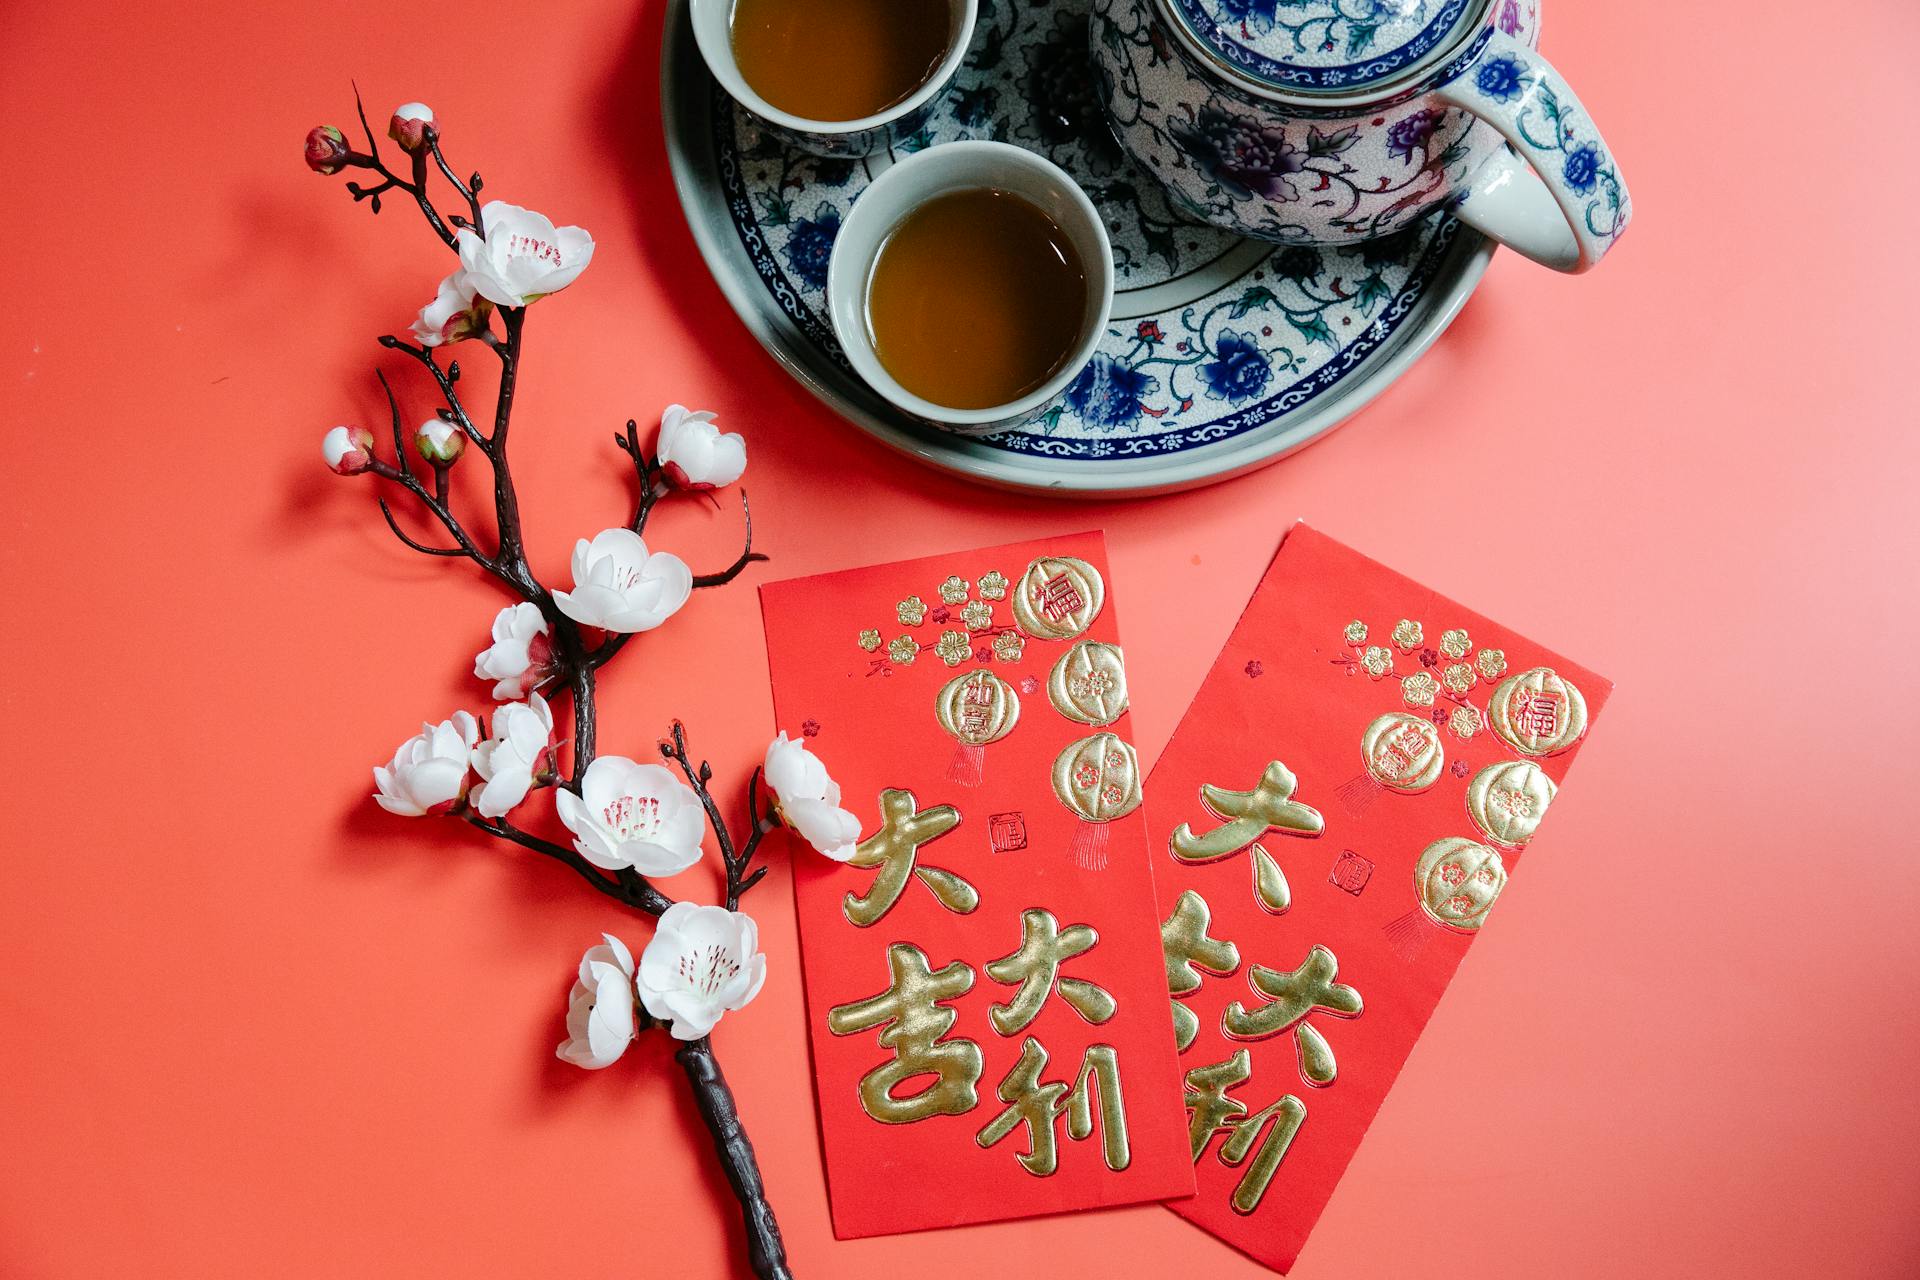 Top view of oriental packets with hieroglyphs against blossoming flower sprig and tea set during New Year holiday on red background